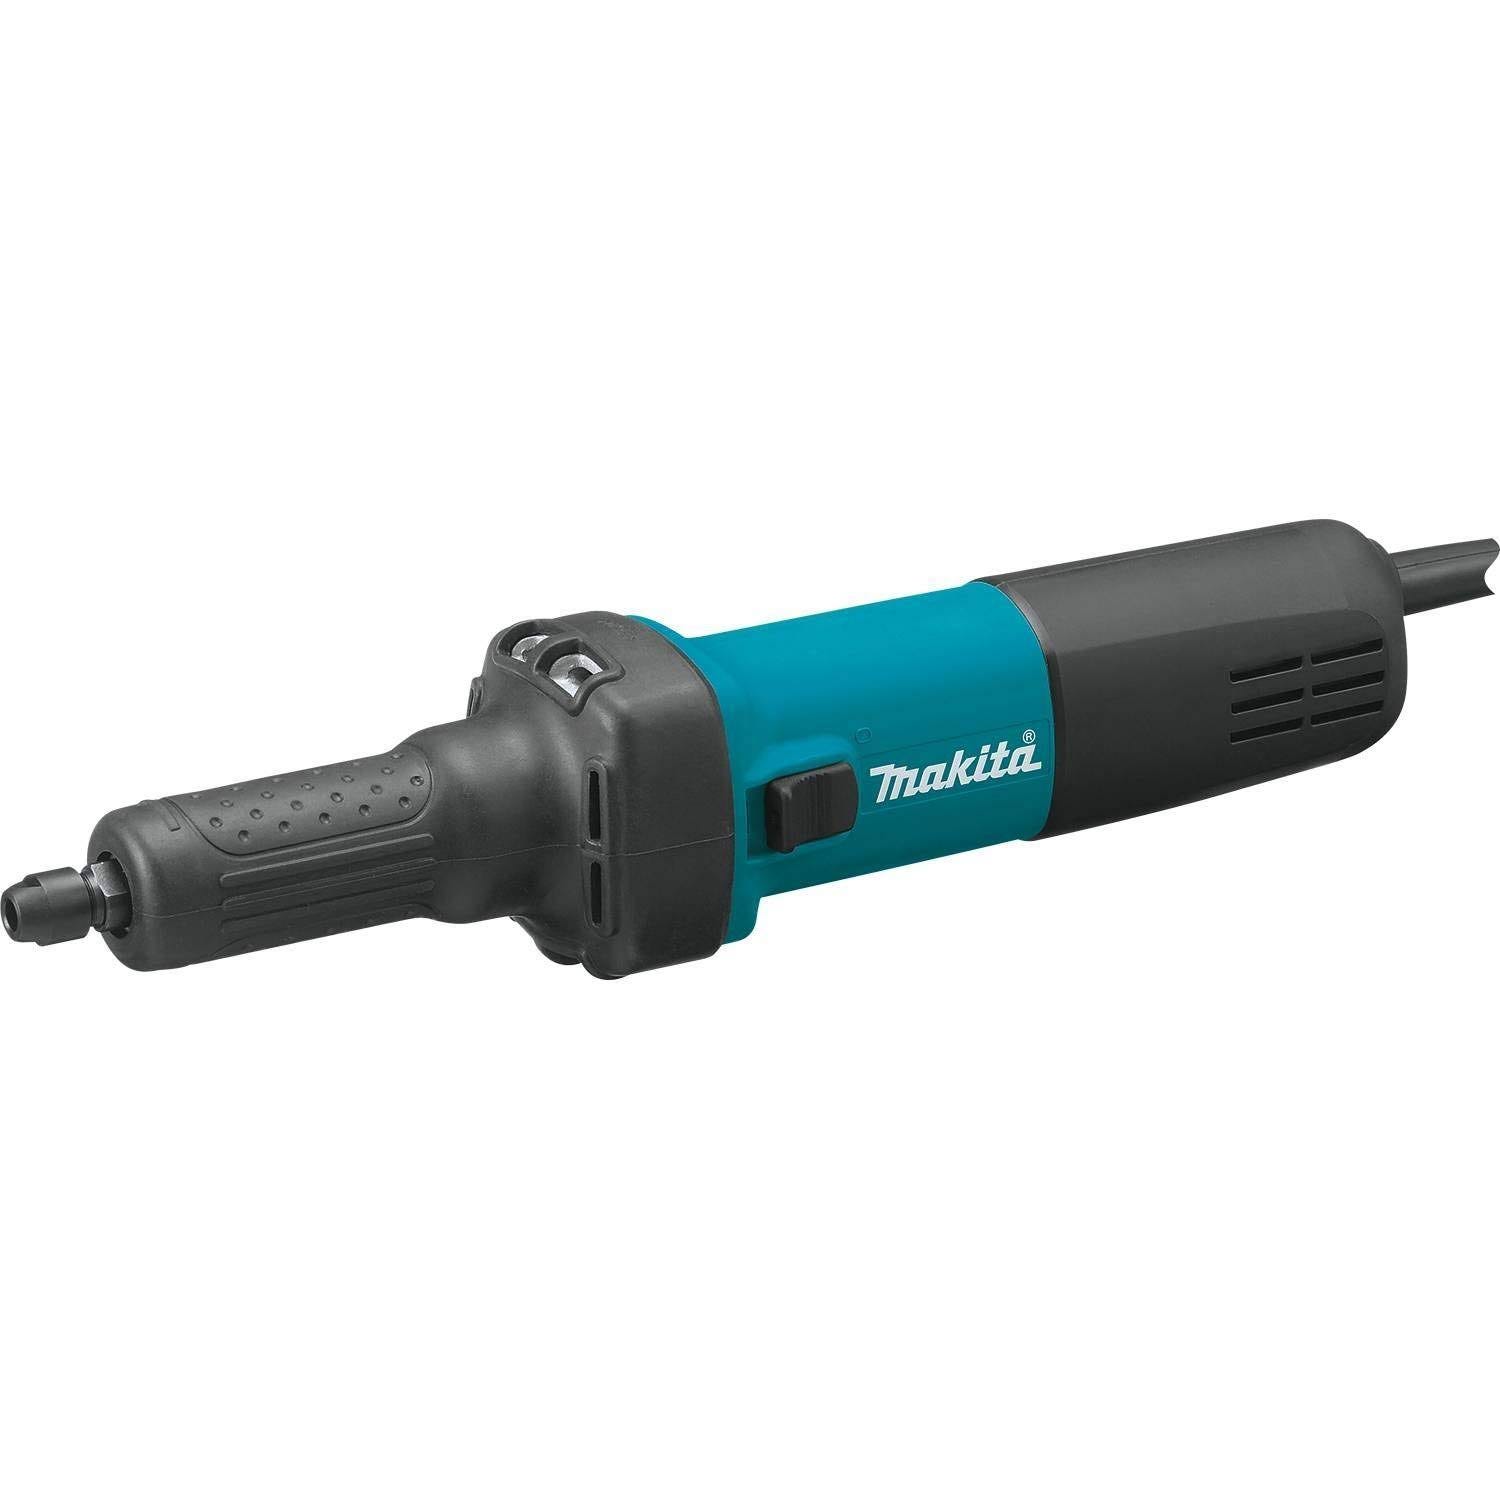 Makita GD0601 6mm Die Grinder with Dust-Proof Protection | Image